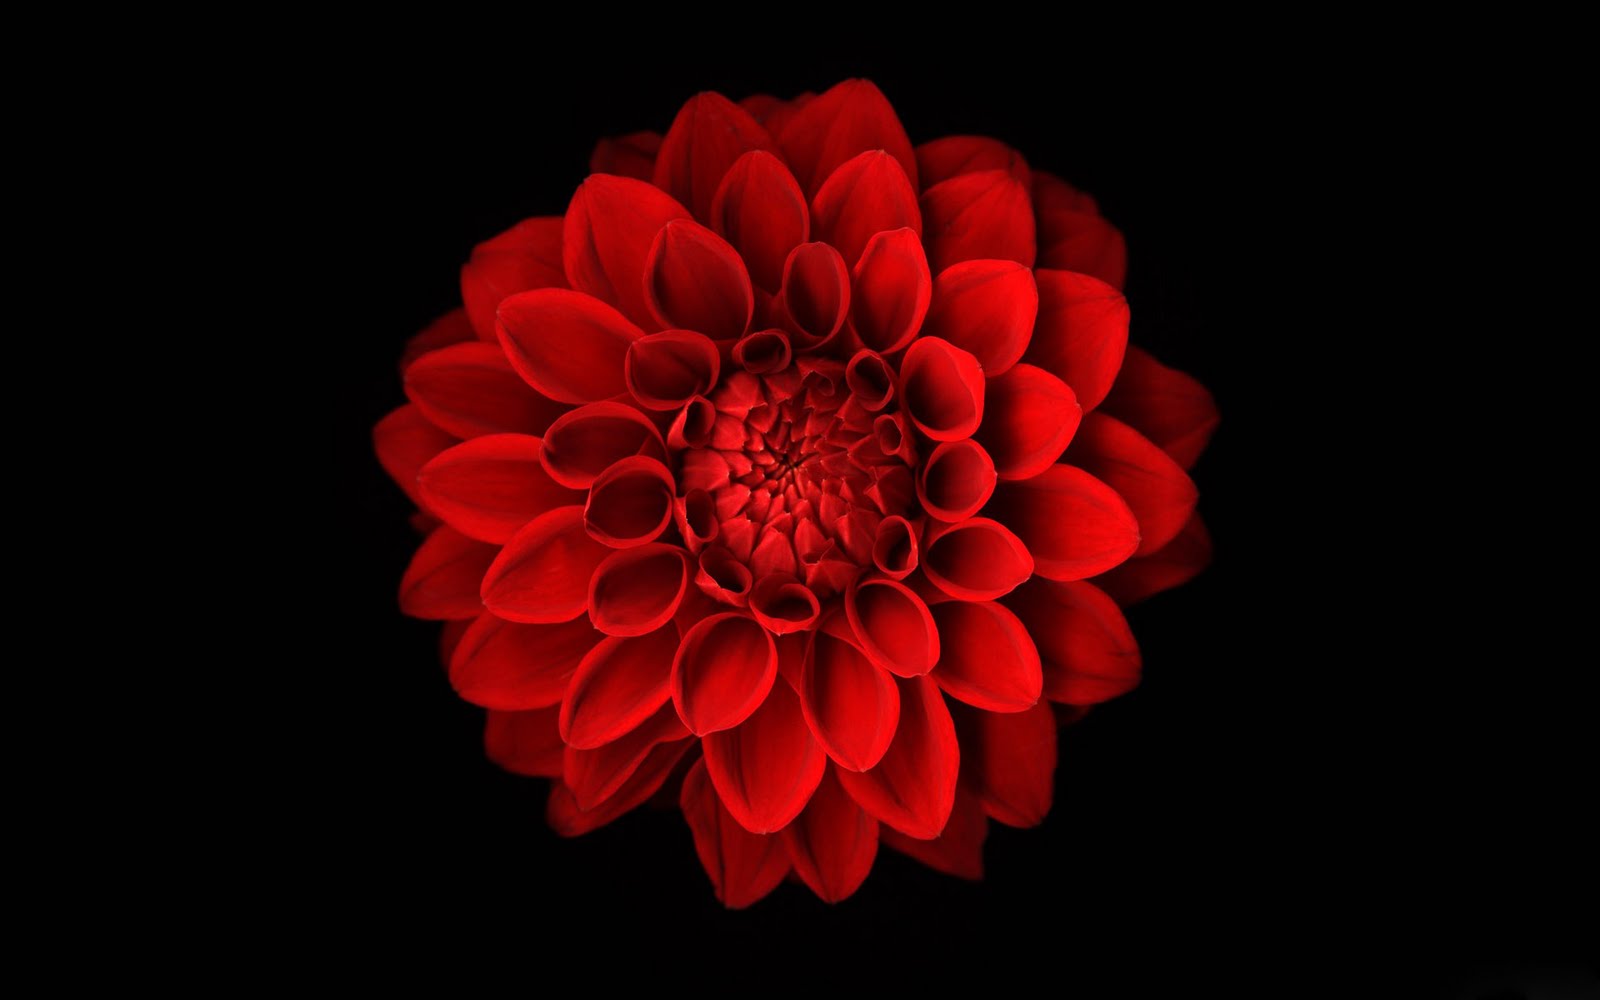 Background Or Backdrop Wallpapers Dahlia Flower Beautiful Nature Closeup  Free Space To Enter Text Stock Photo Picture And Royalty Free Image Image  110456920